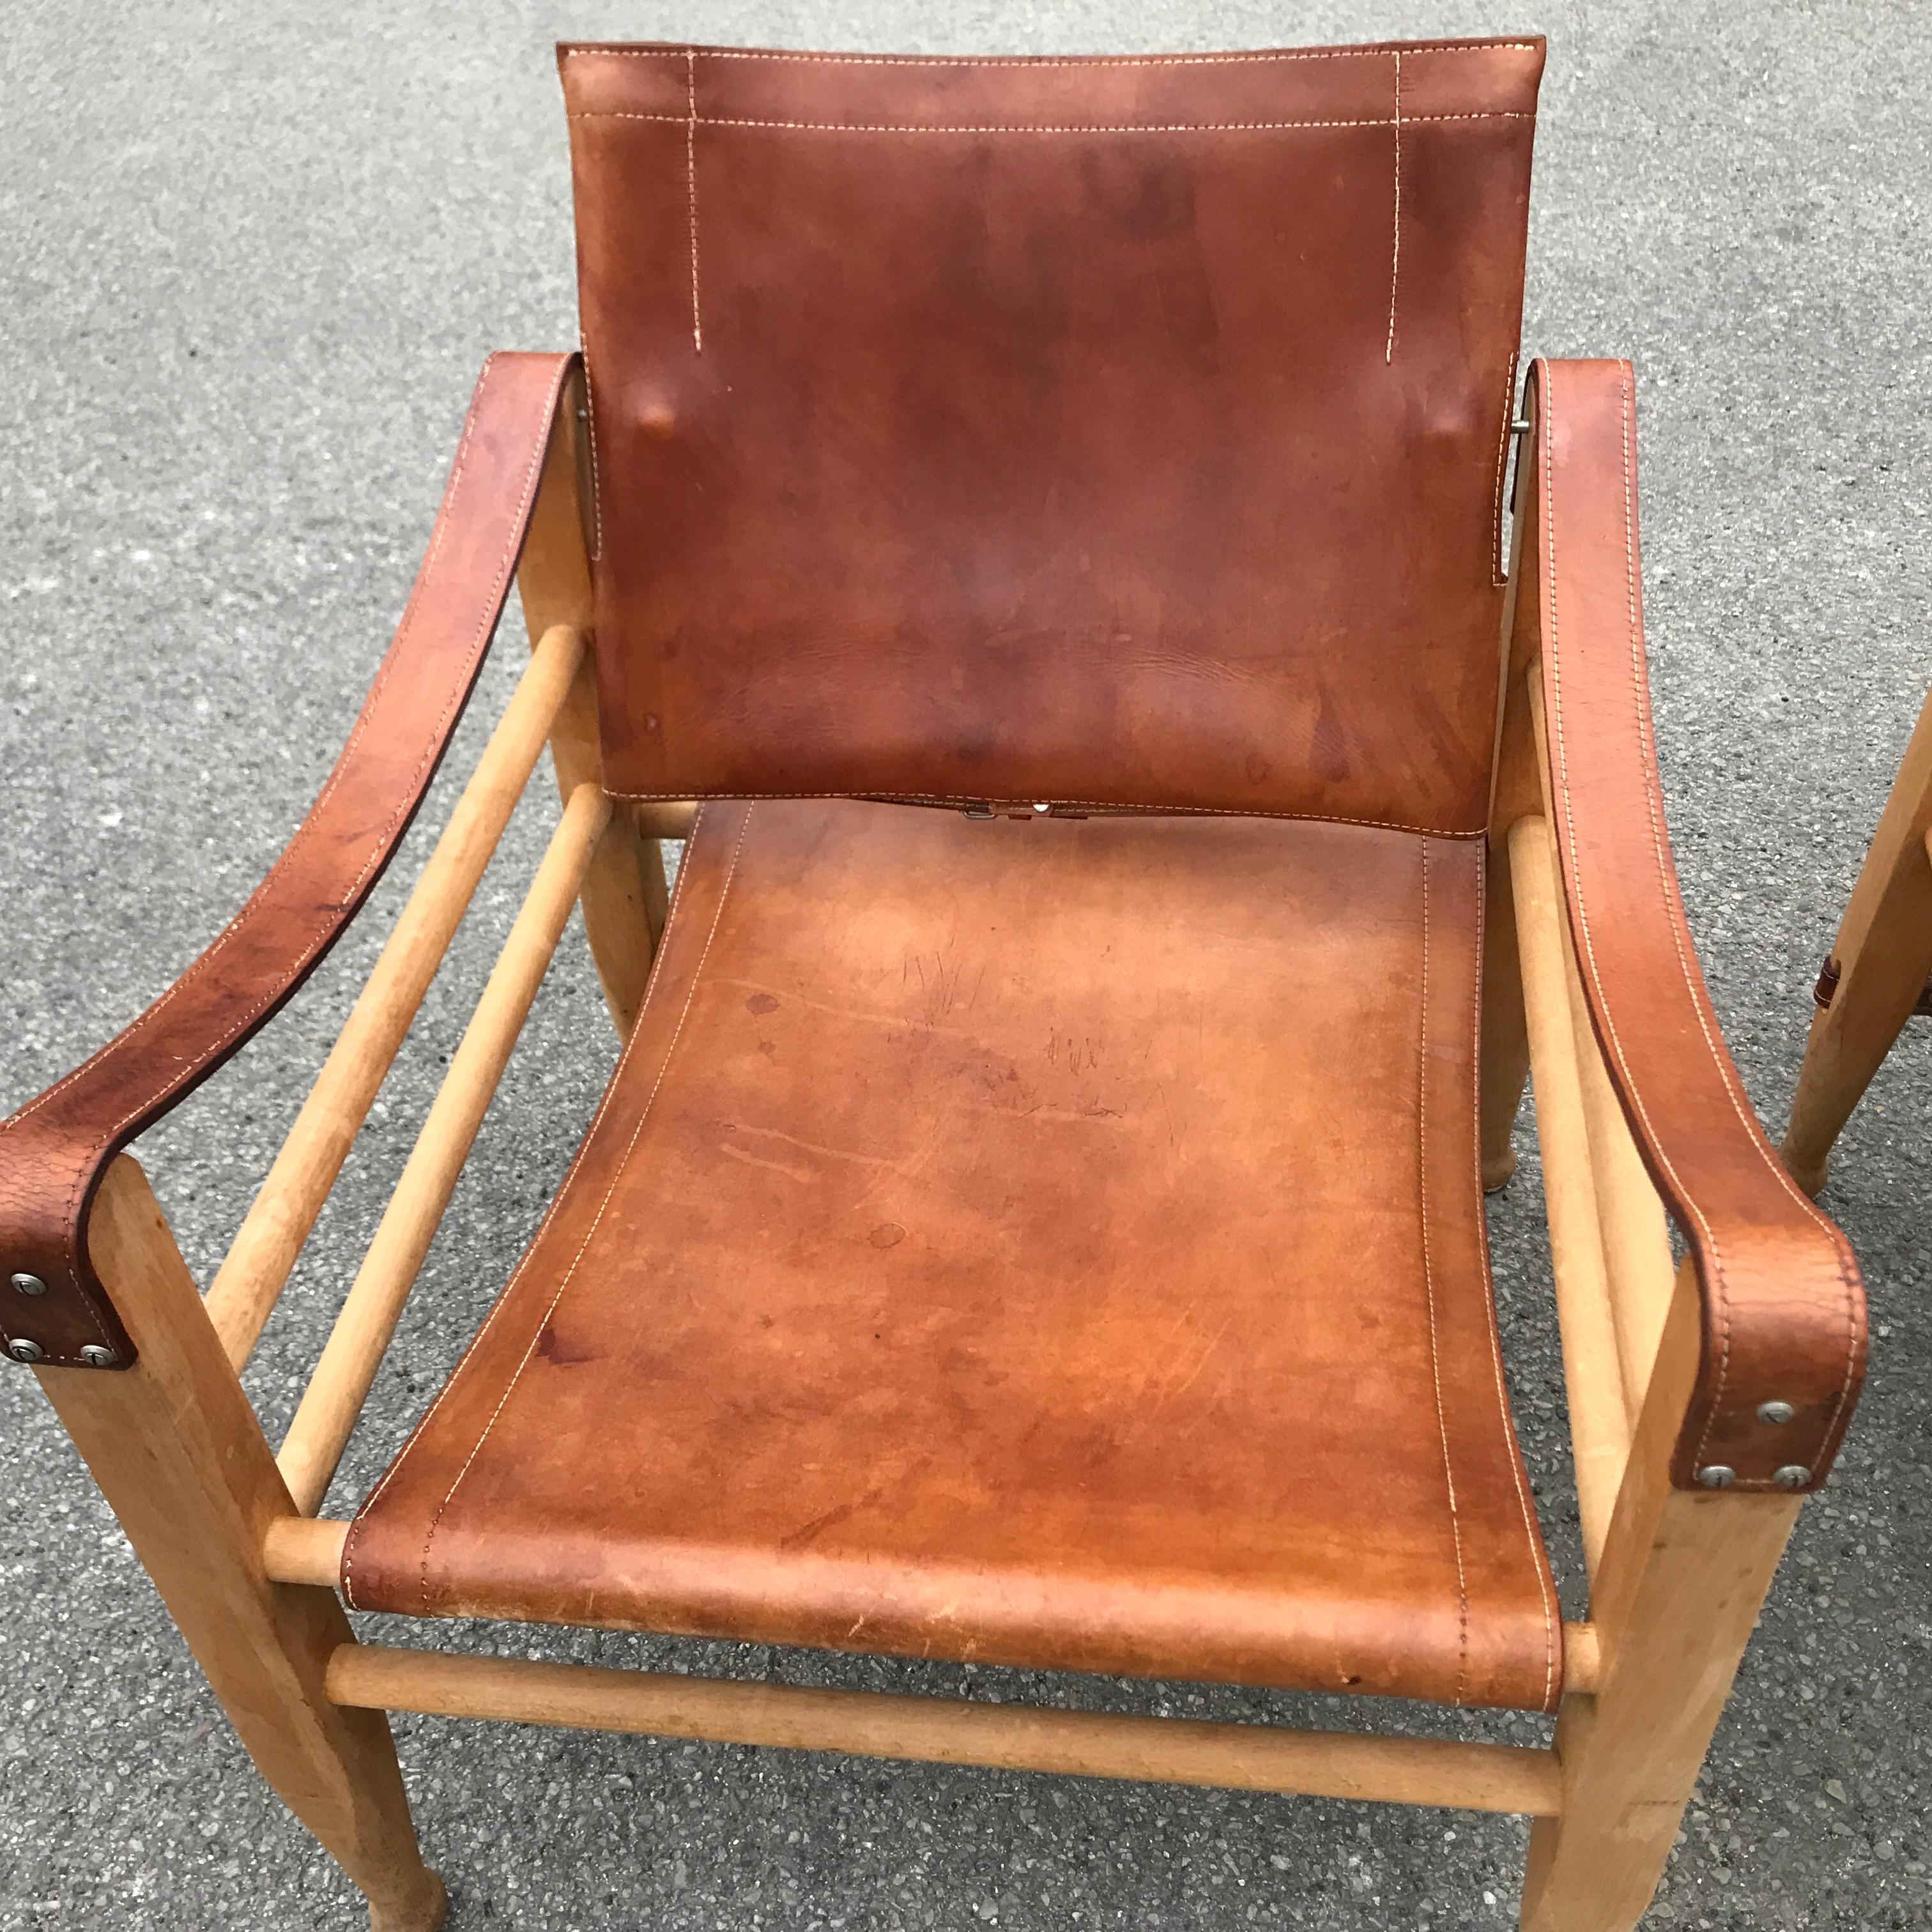 A pair of rarely seen Mid-Century Modern Danish 1960s Safari chairs by Aage Bruun and Son, in beechwood and tan or cognac natural leather. In very good original vintage condition, with a lovely patina.